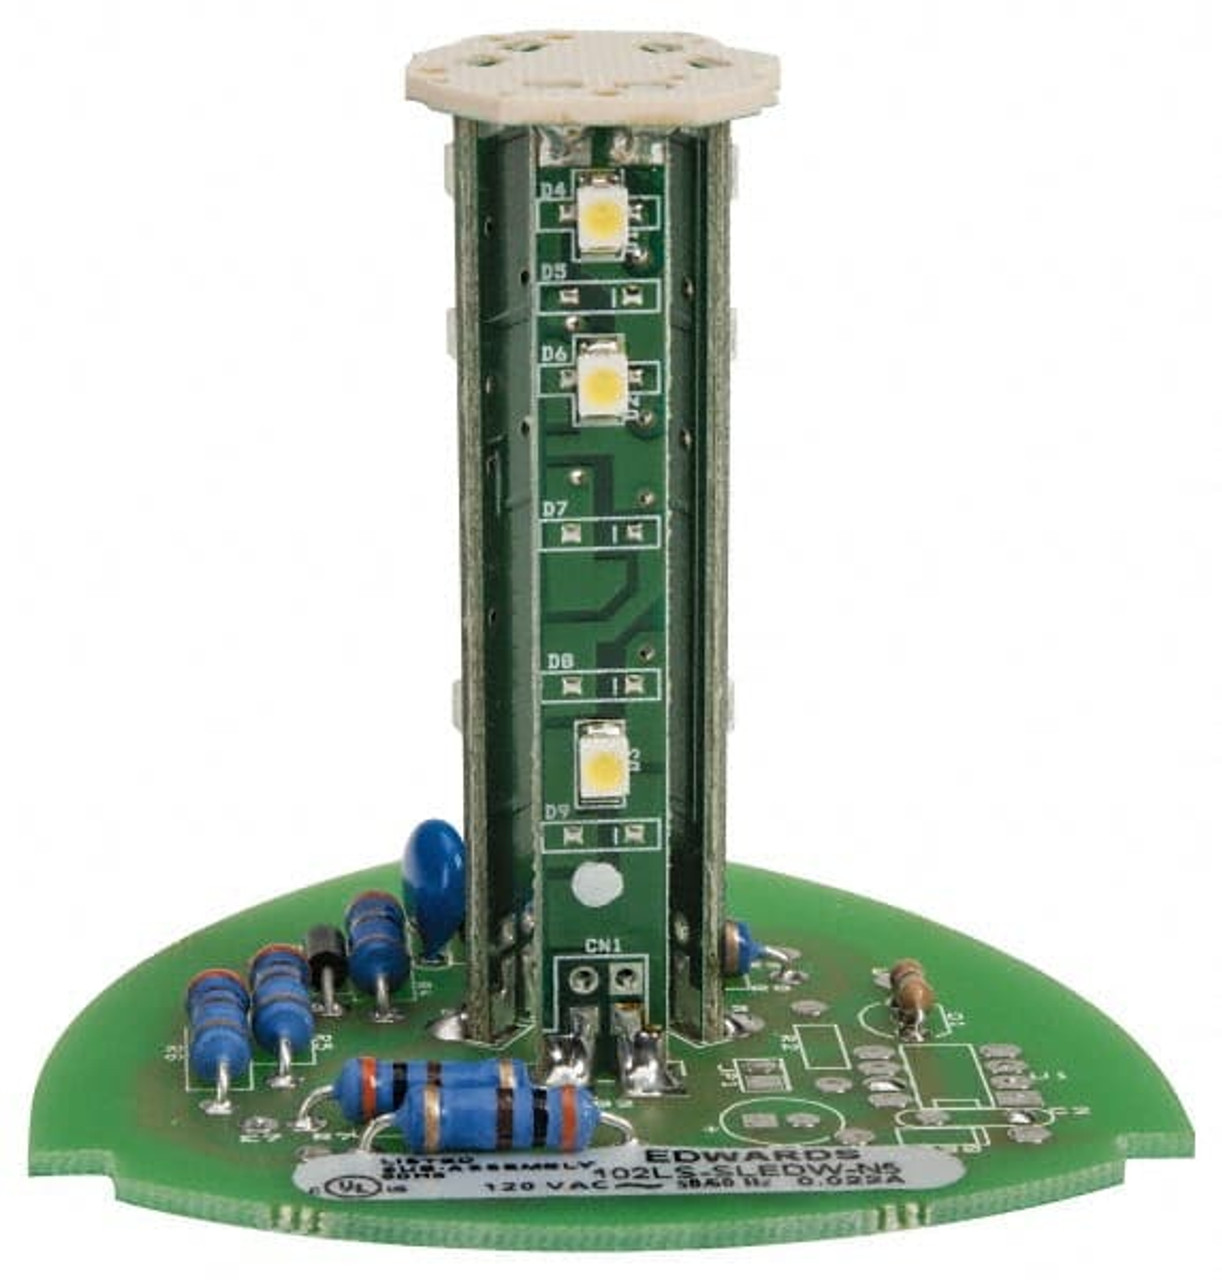 Edwards Signaling LED Steady, Stackable Tower Light Module 120 0.02 Amp, IP54, IP65 Ingress Rating, 3R, 4X NEMA Rated, Panel Mount, Pipe Mount 102LS-SLEDW-N5 - 74651720 - Penn Tool Co.,